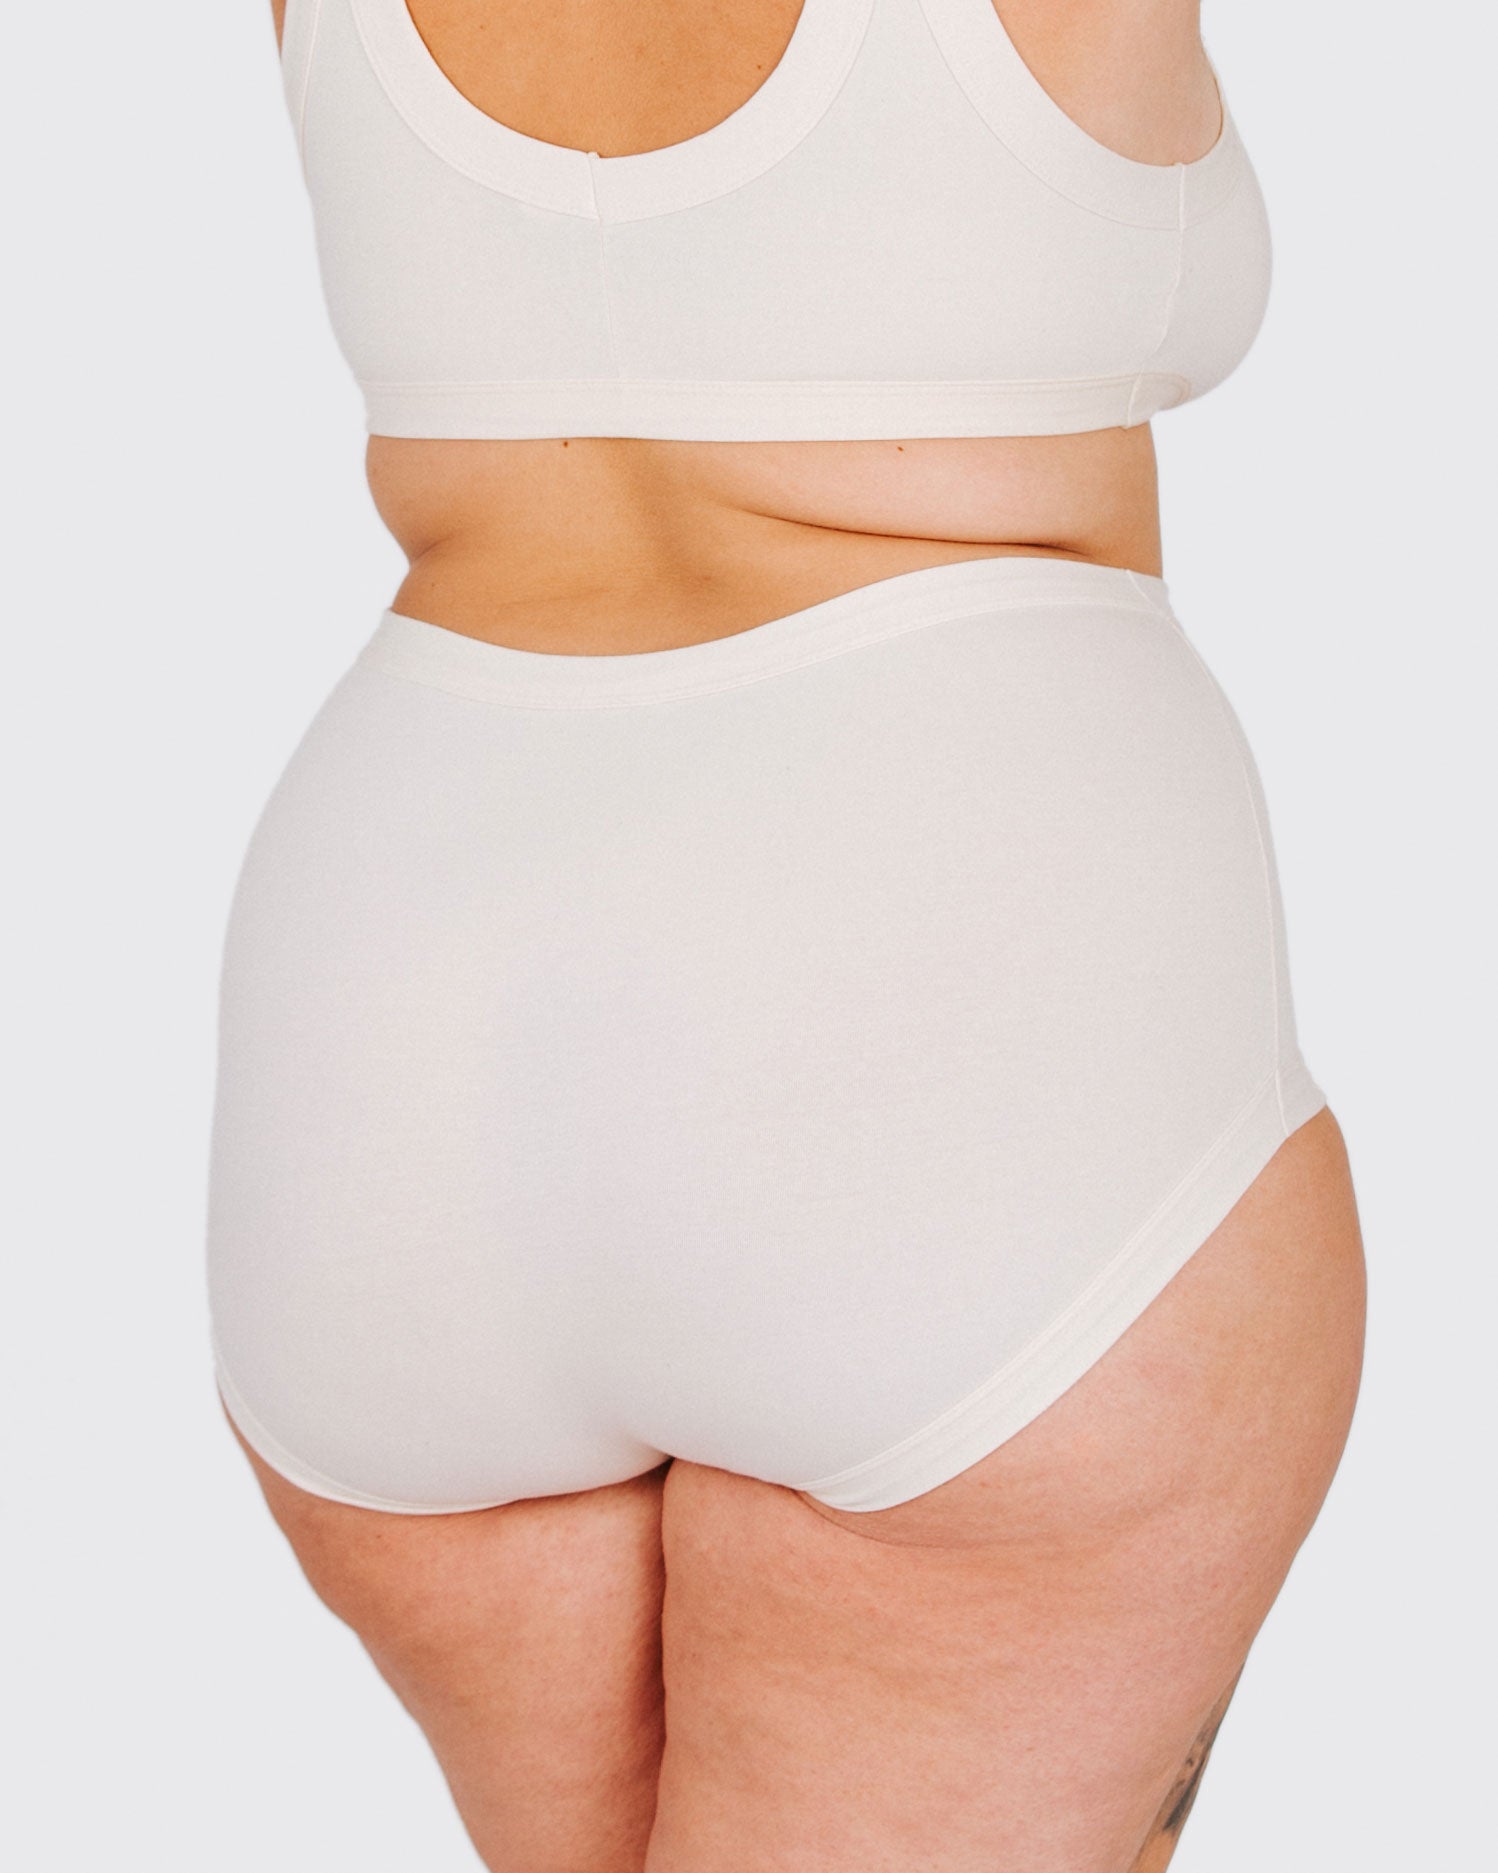 Fit photo from the back of Thunderpants organic cotton Original style underwear in off-white, showing a wedgie-free bum, on a model.